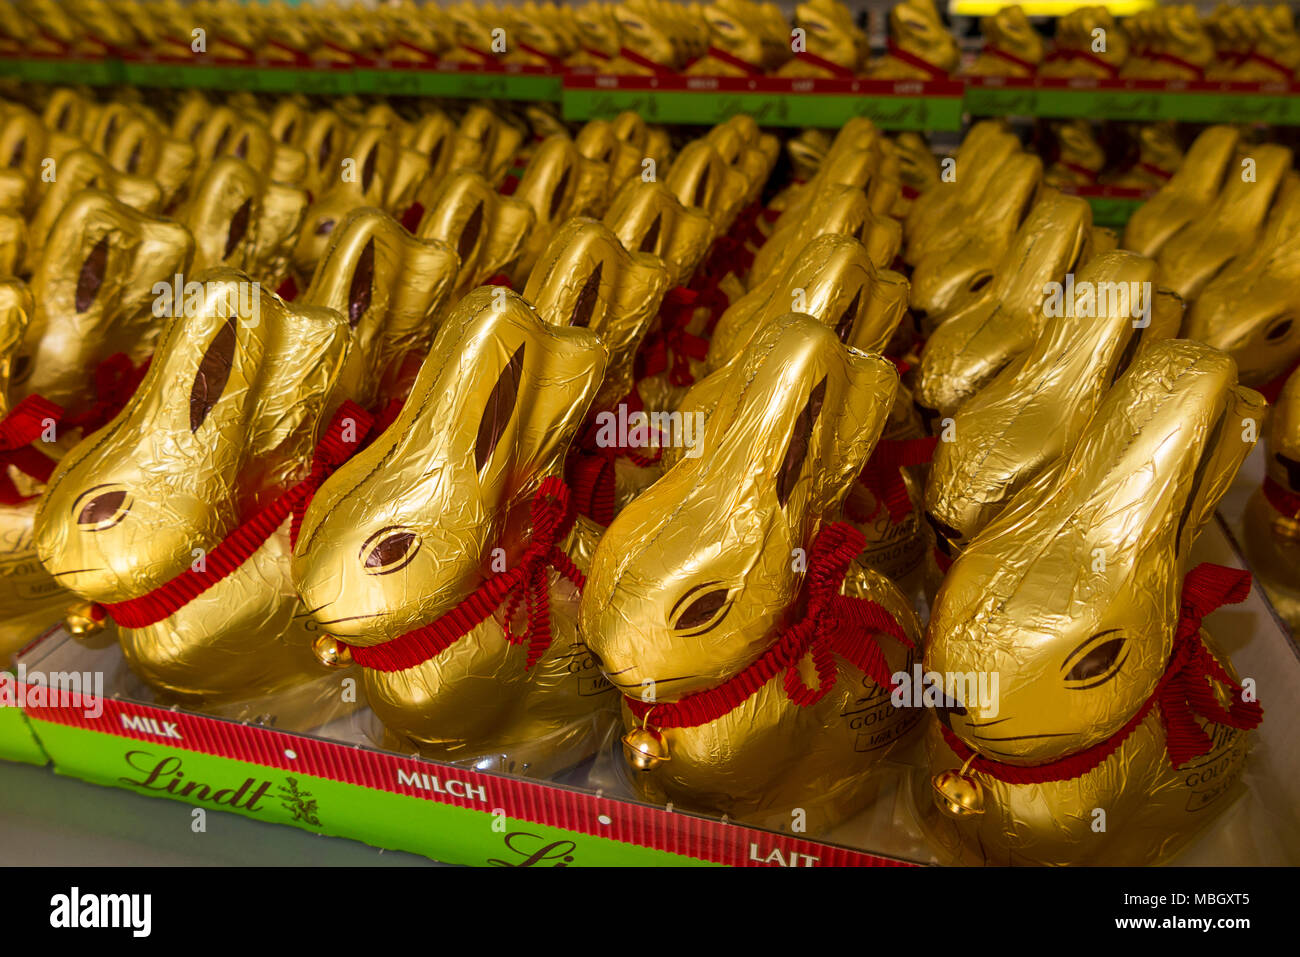 Foil wrapped chocolate bunny rabbit made by premium chocolate maker Lindt & Sprüngli, the famous Swiss chocolatier, especially popular at Easter. (96) Stock Photo